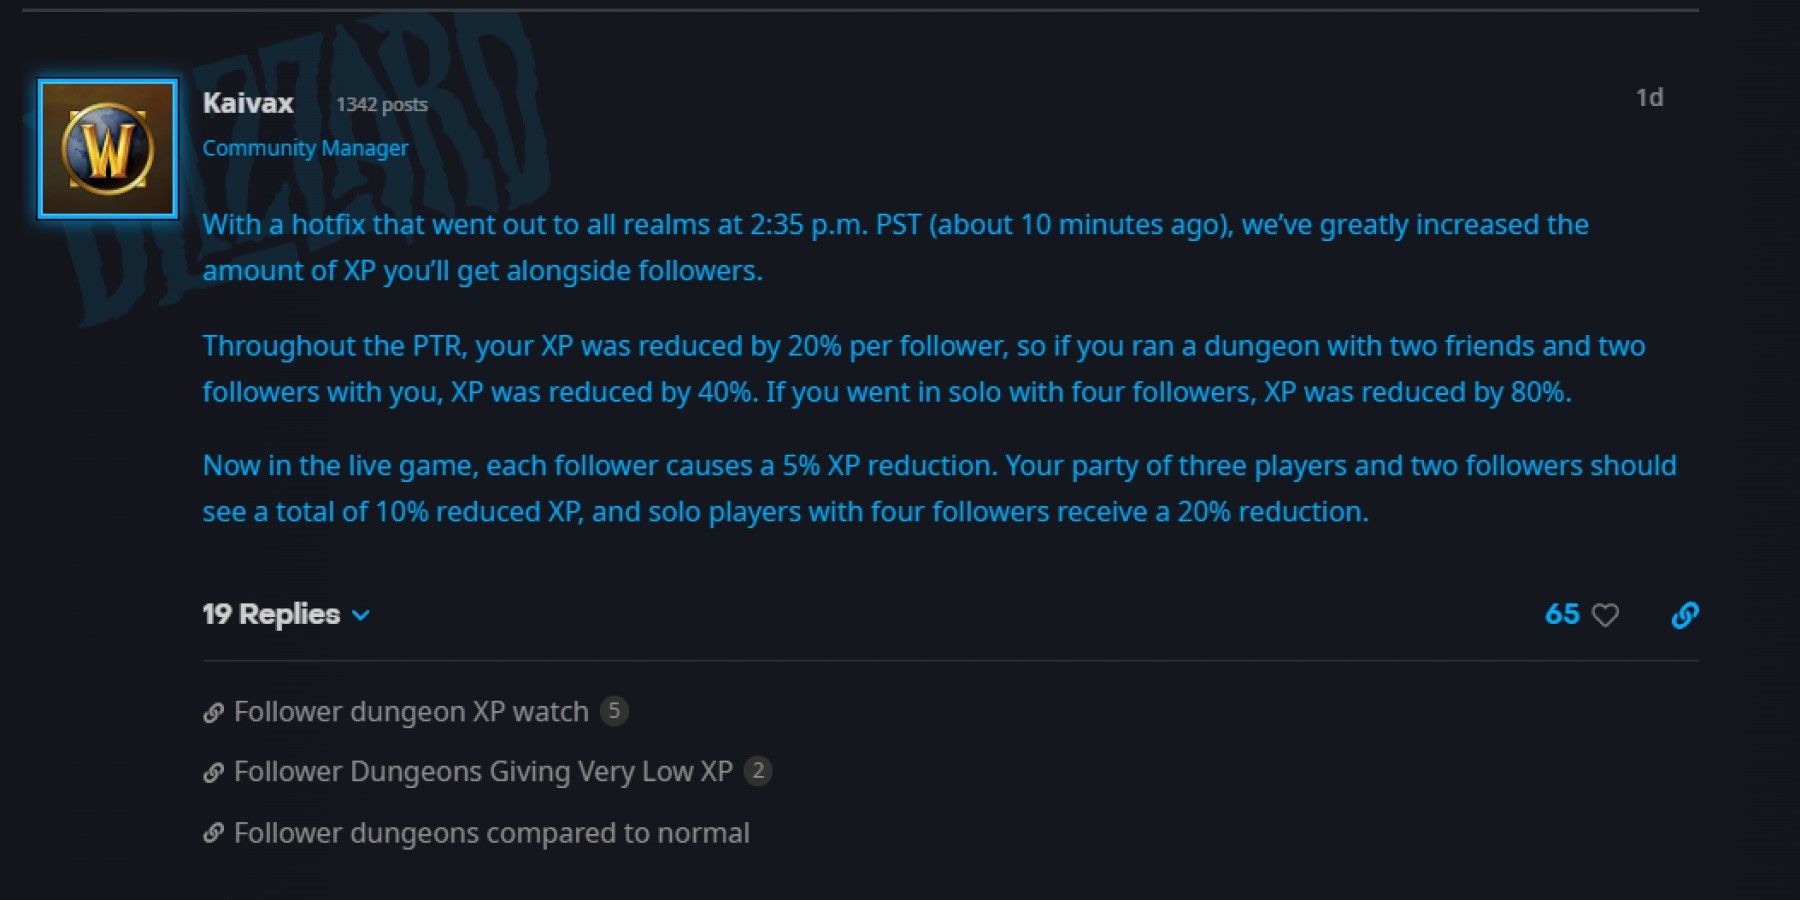 Forum post from Kaivax explaining follower dungeon experience calculations